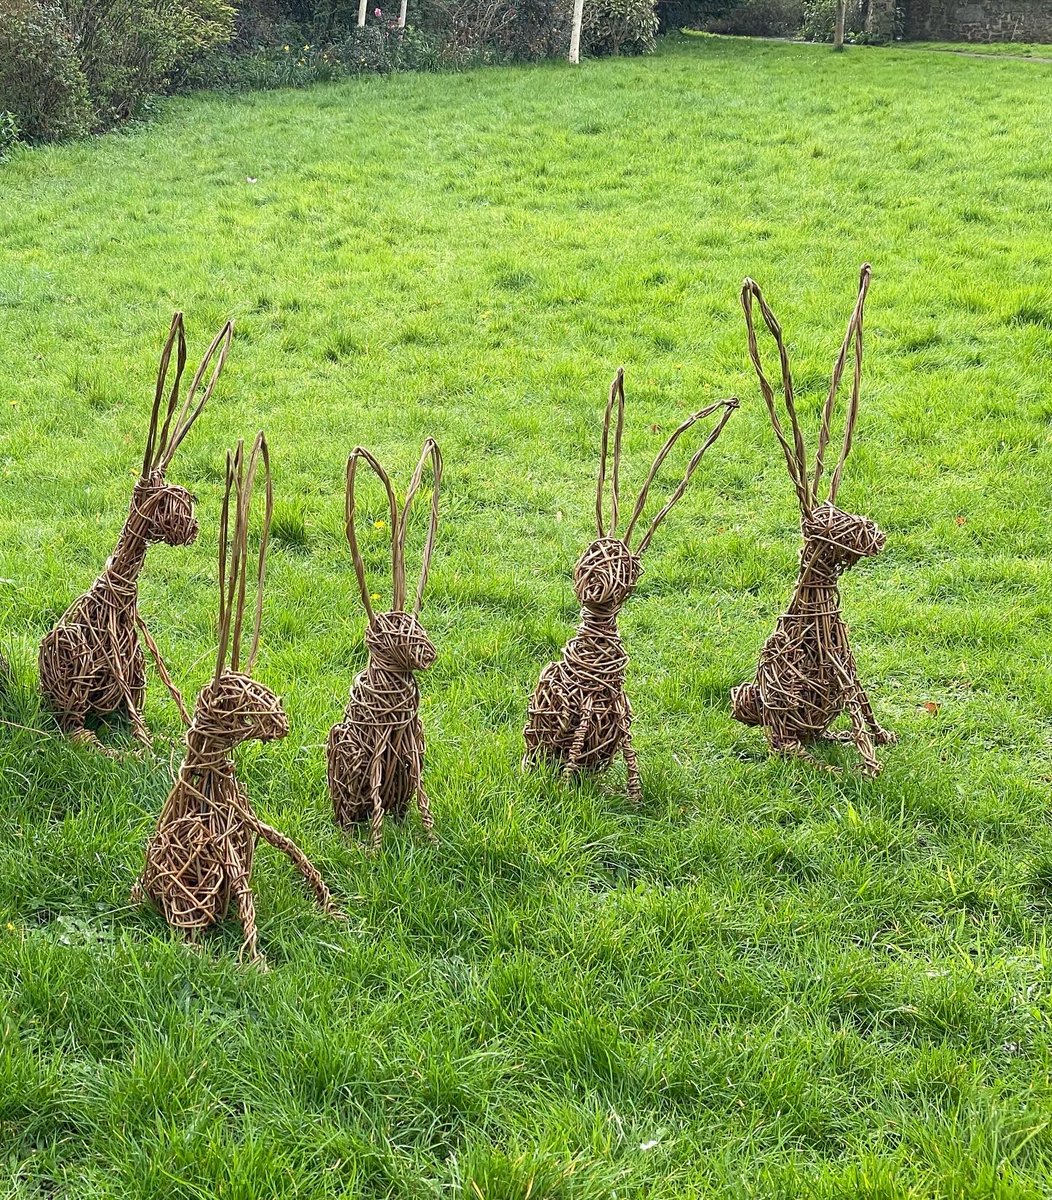 Such a lovely time at @walronds, thanks to all who came along and made a March Hare today. It was great to see familiar and new faces too. Fab work created by all Wishing everyone a hopping good weekend 🐇🐇🐇 #willowworkshop